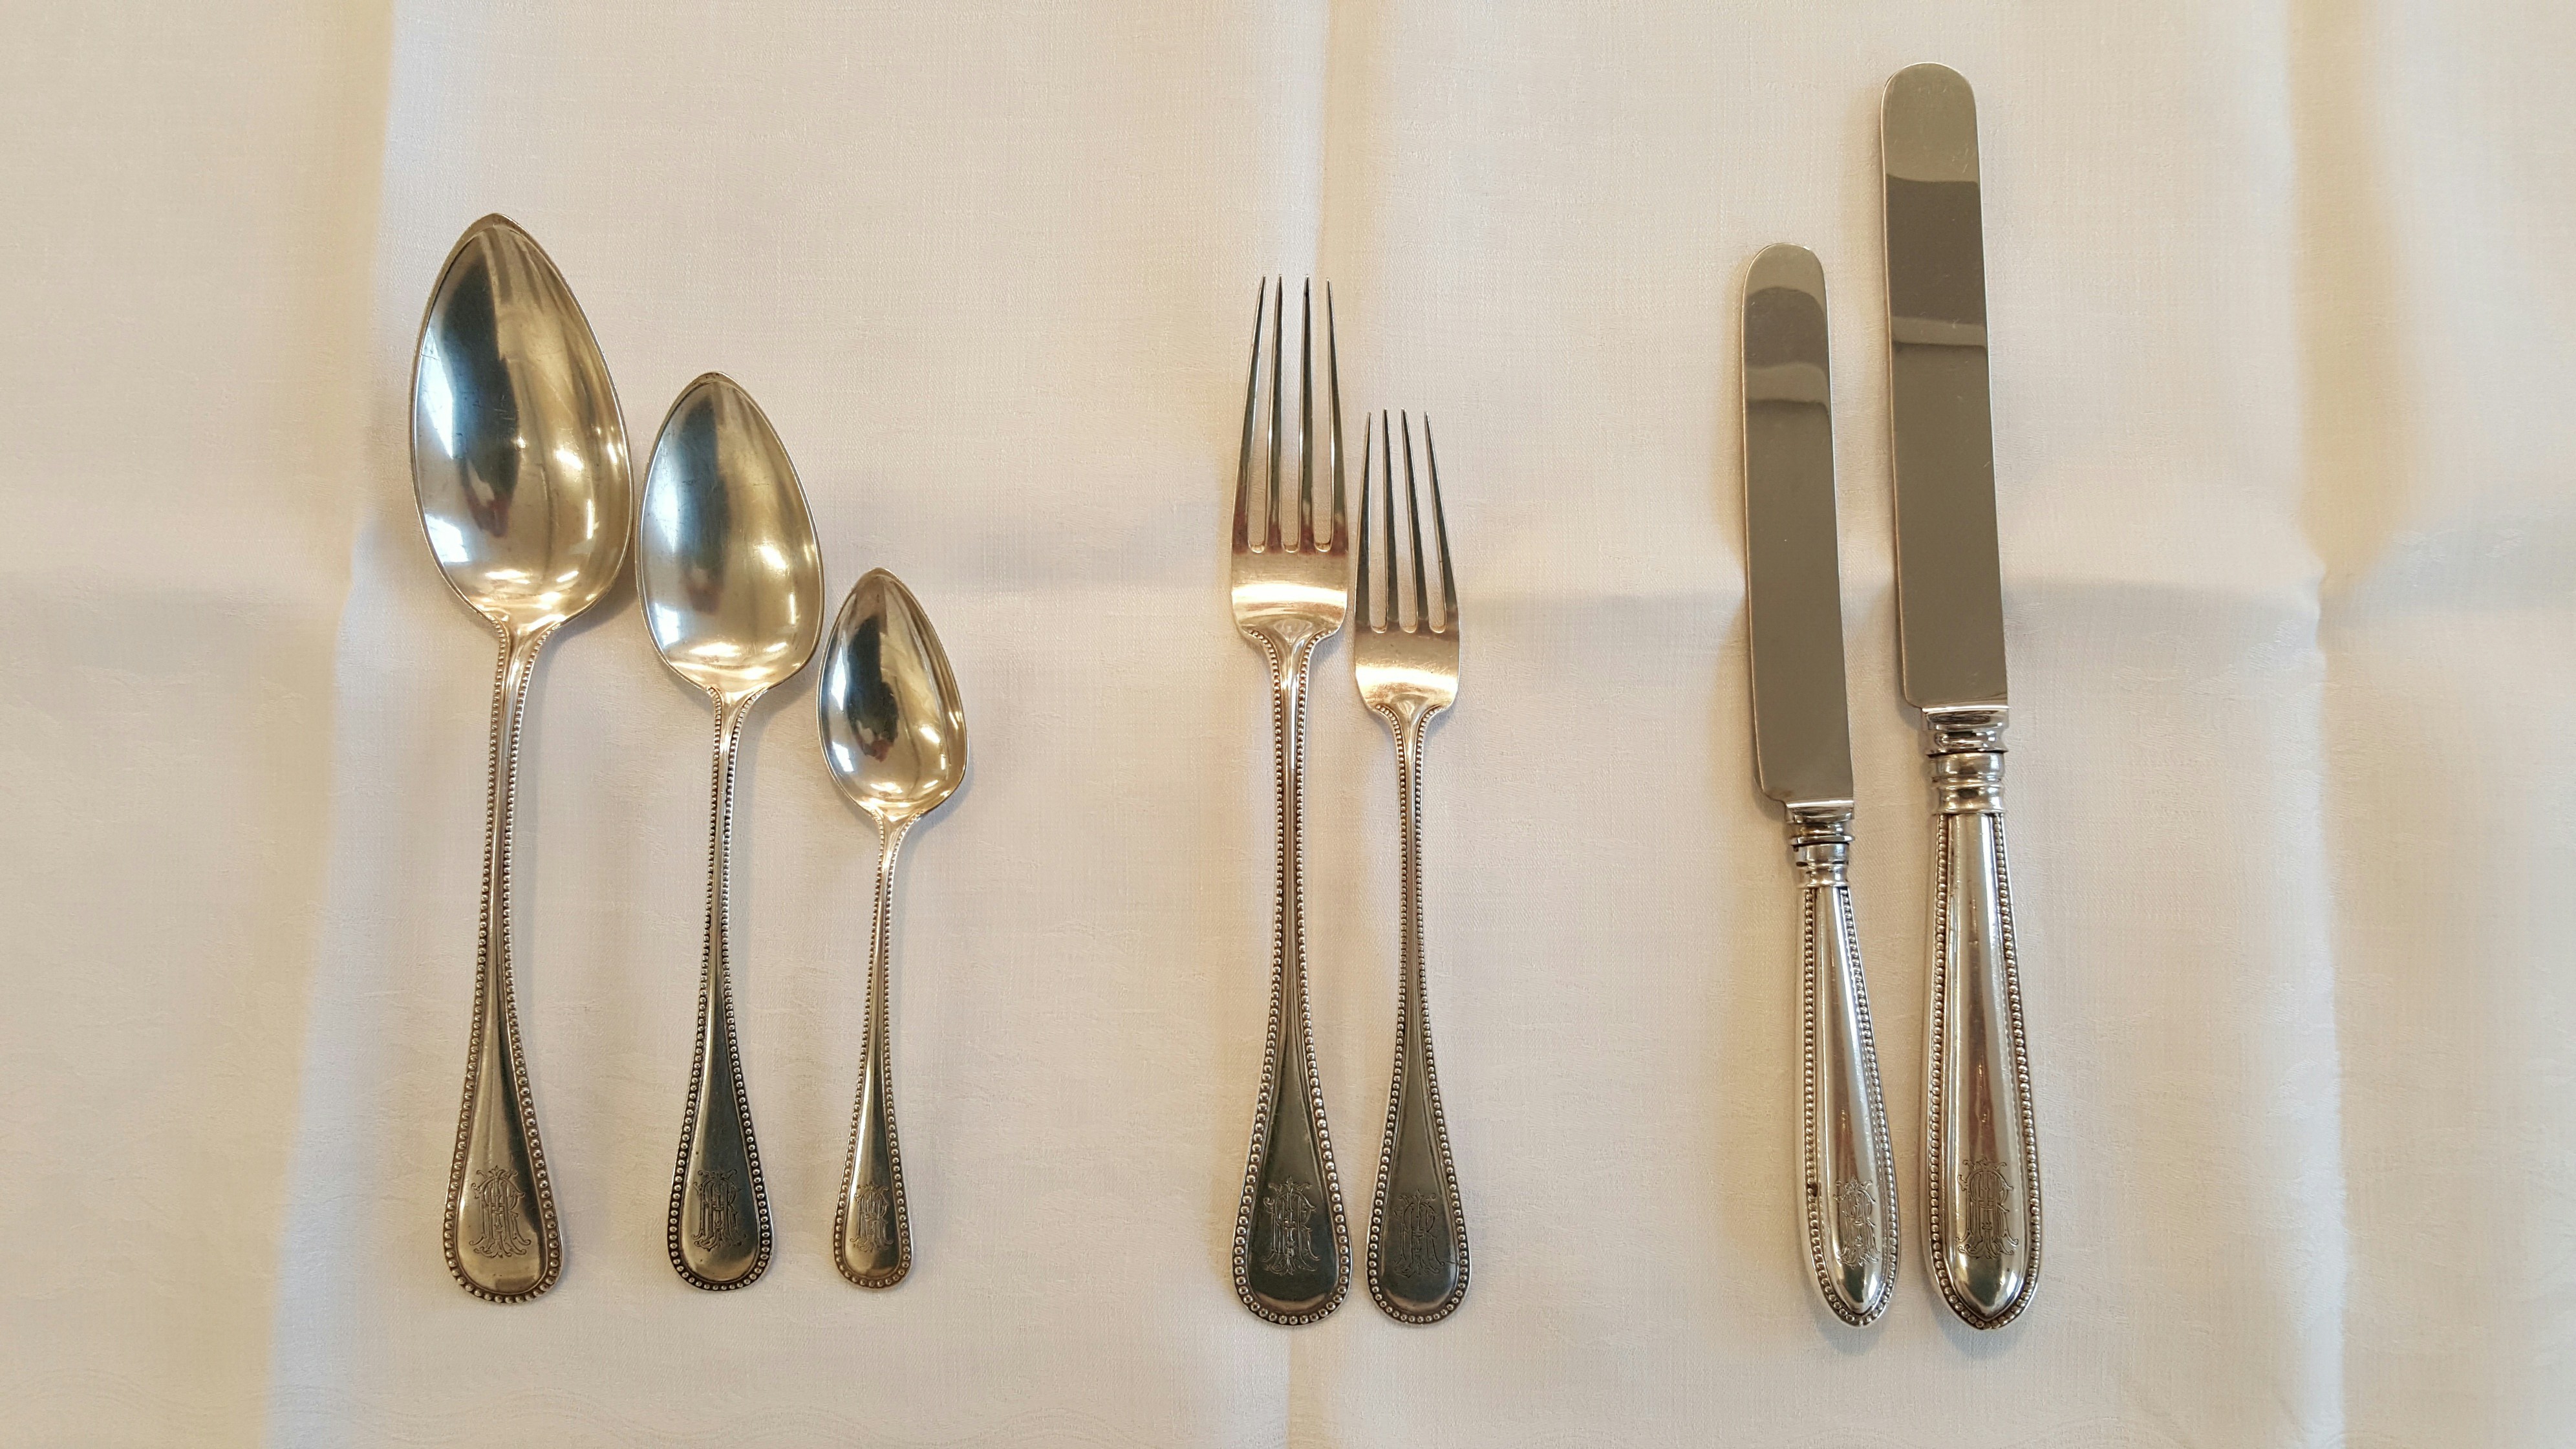 The silverware in use in 1901 was larger than the pieces we use today. the soup spoon on the left is ten inches long and feel huge.